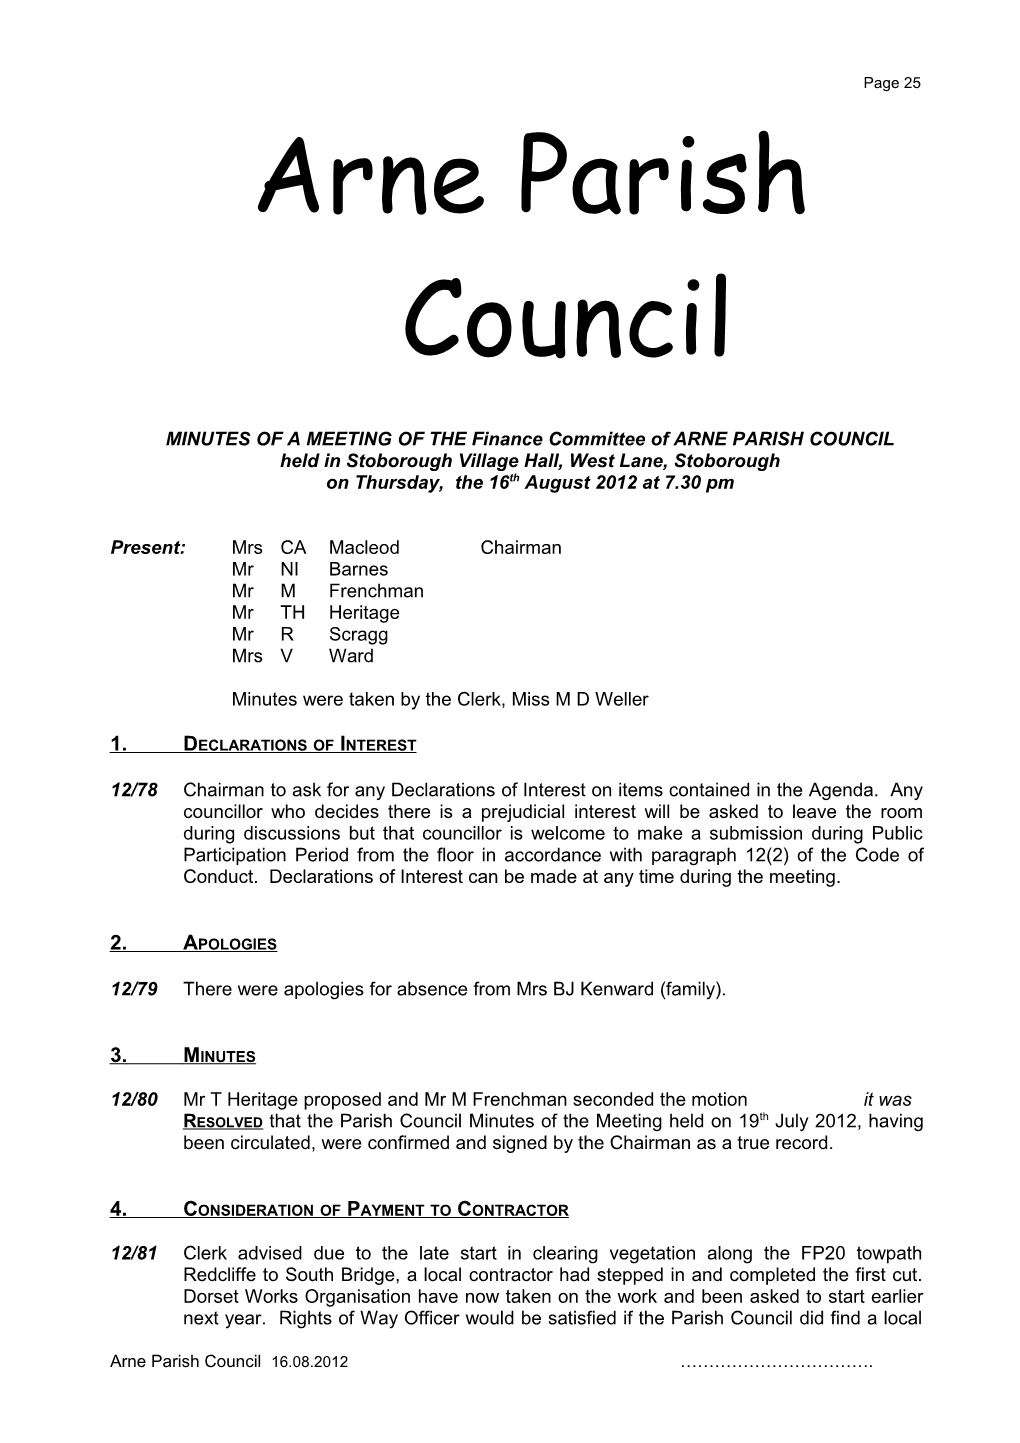 MINUTES Ofameetingof the Finance Committee of ARNE PARISH COUNCIL